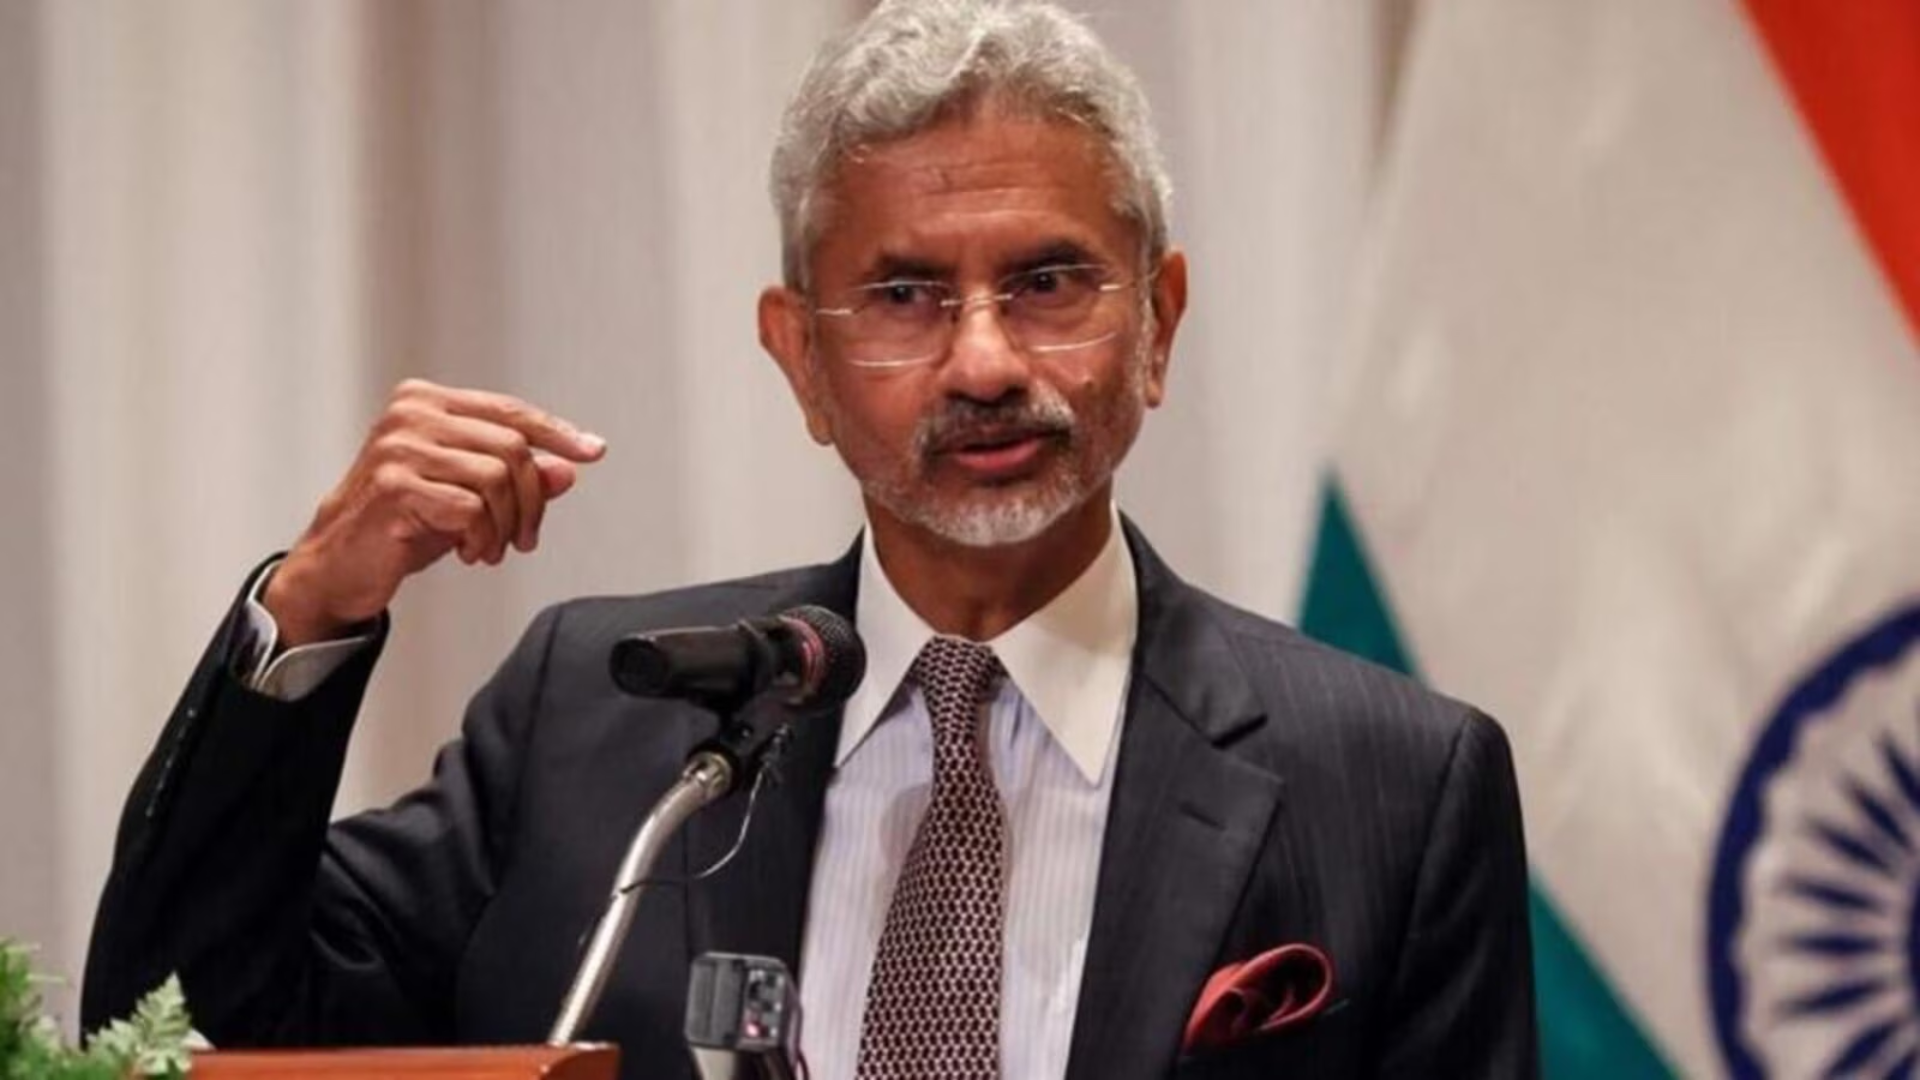 S Jaishankar Reacts To US Statement On Sanctions Over Chabahar Port Agreement